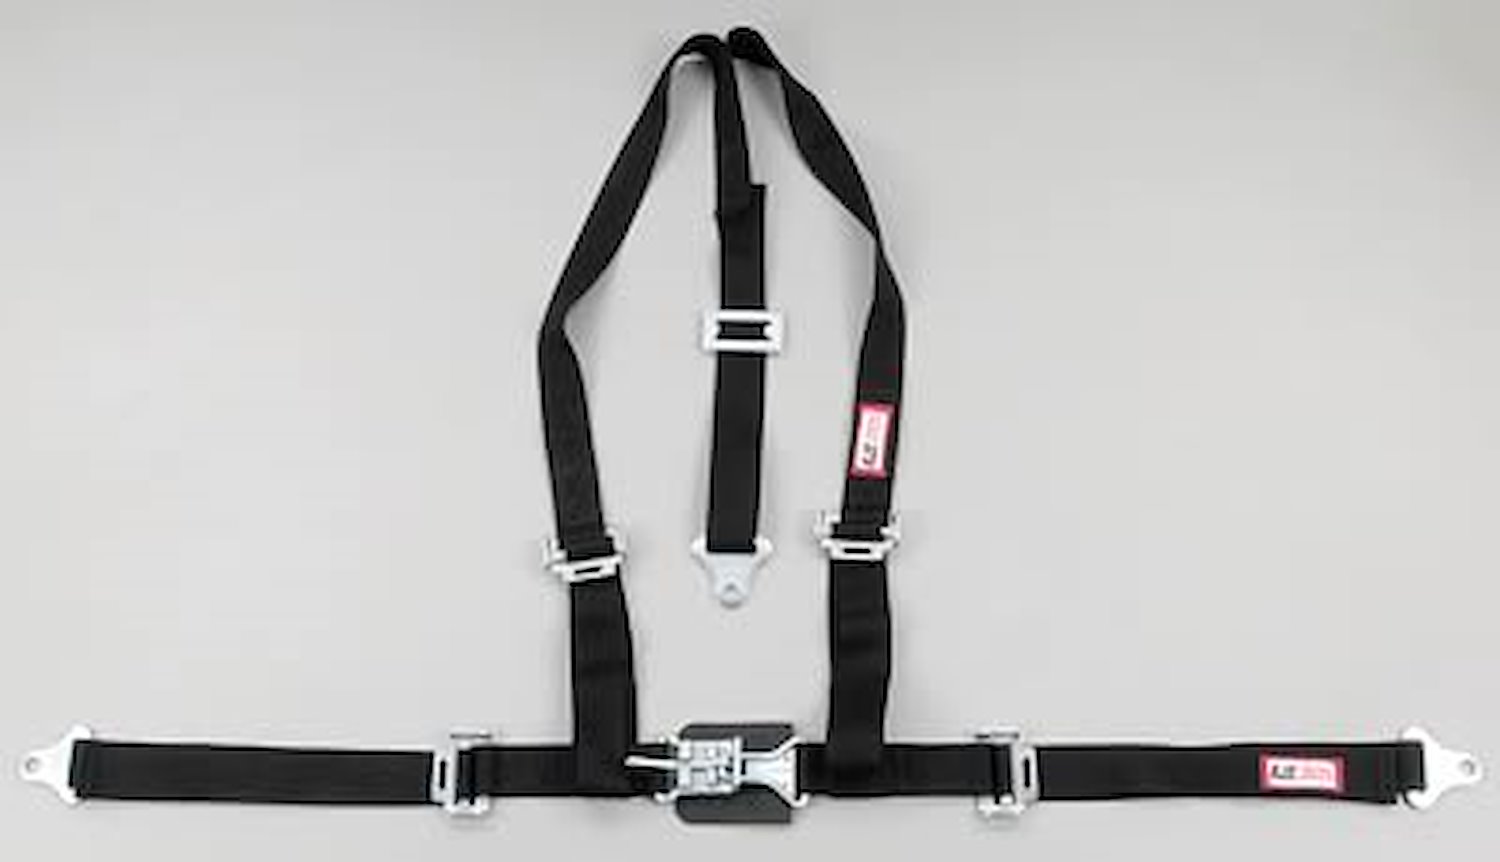 NON-SFI L&L HARNESS 2 PULL UP Lap Belt SNAP SEWN IN 2 S.H. Y FLOOR Mount w/STERNUM STRAP WRAP/BOLT BLUE